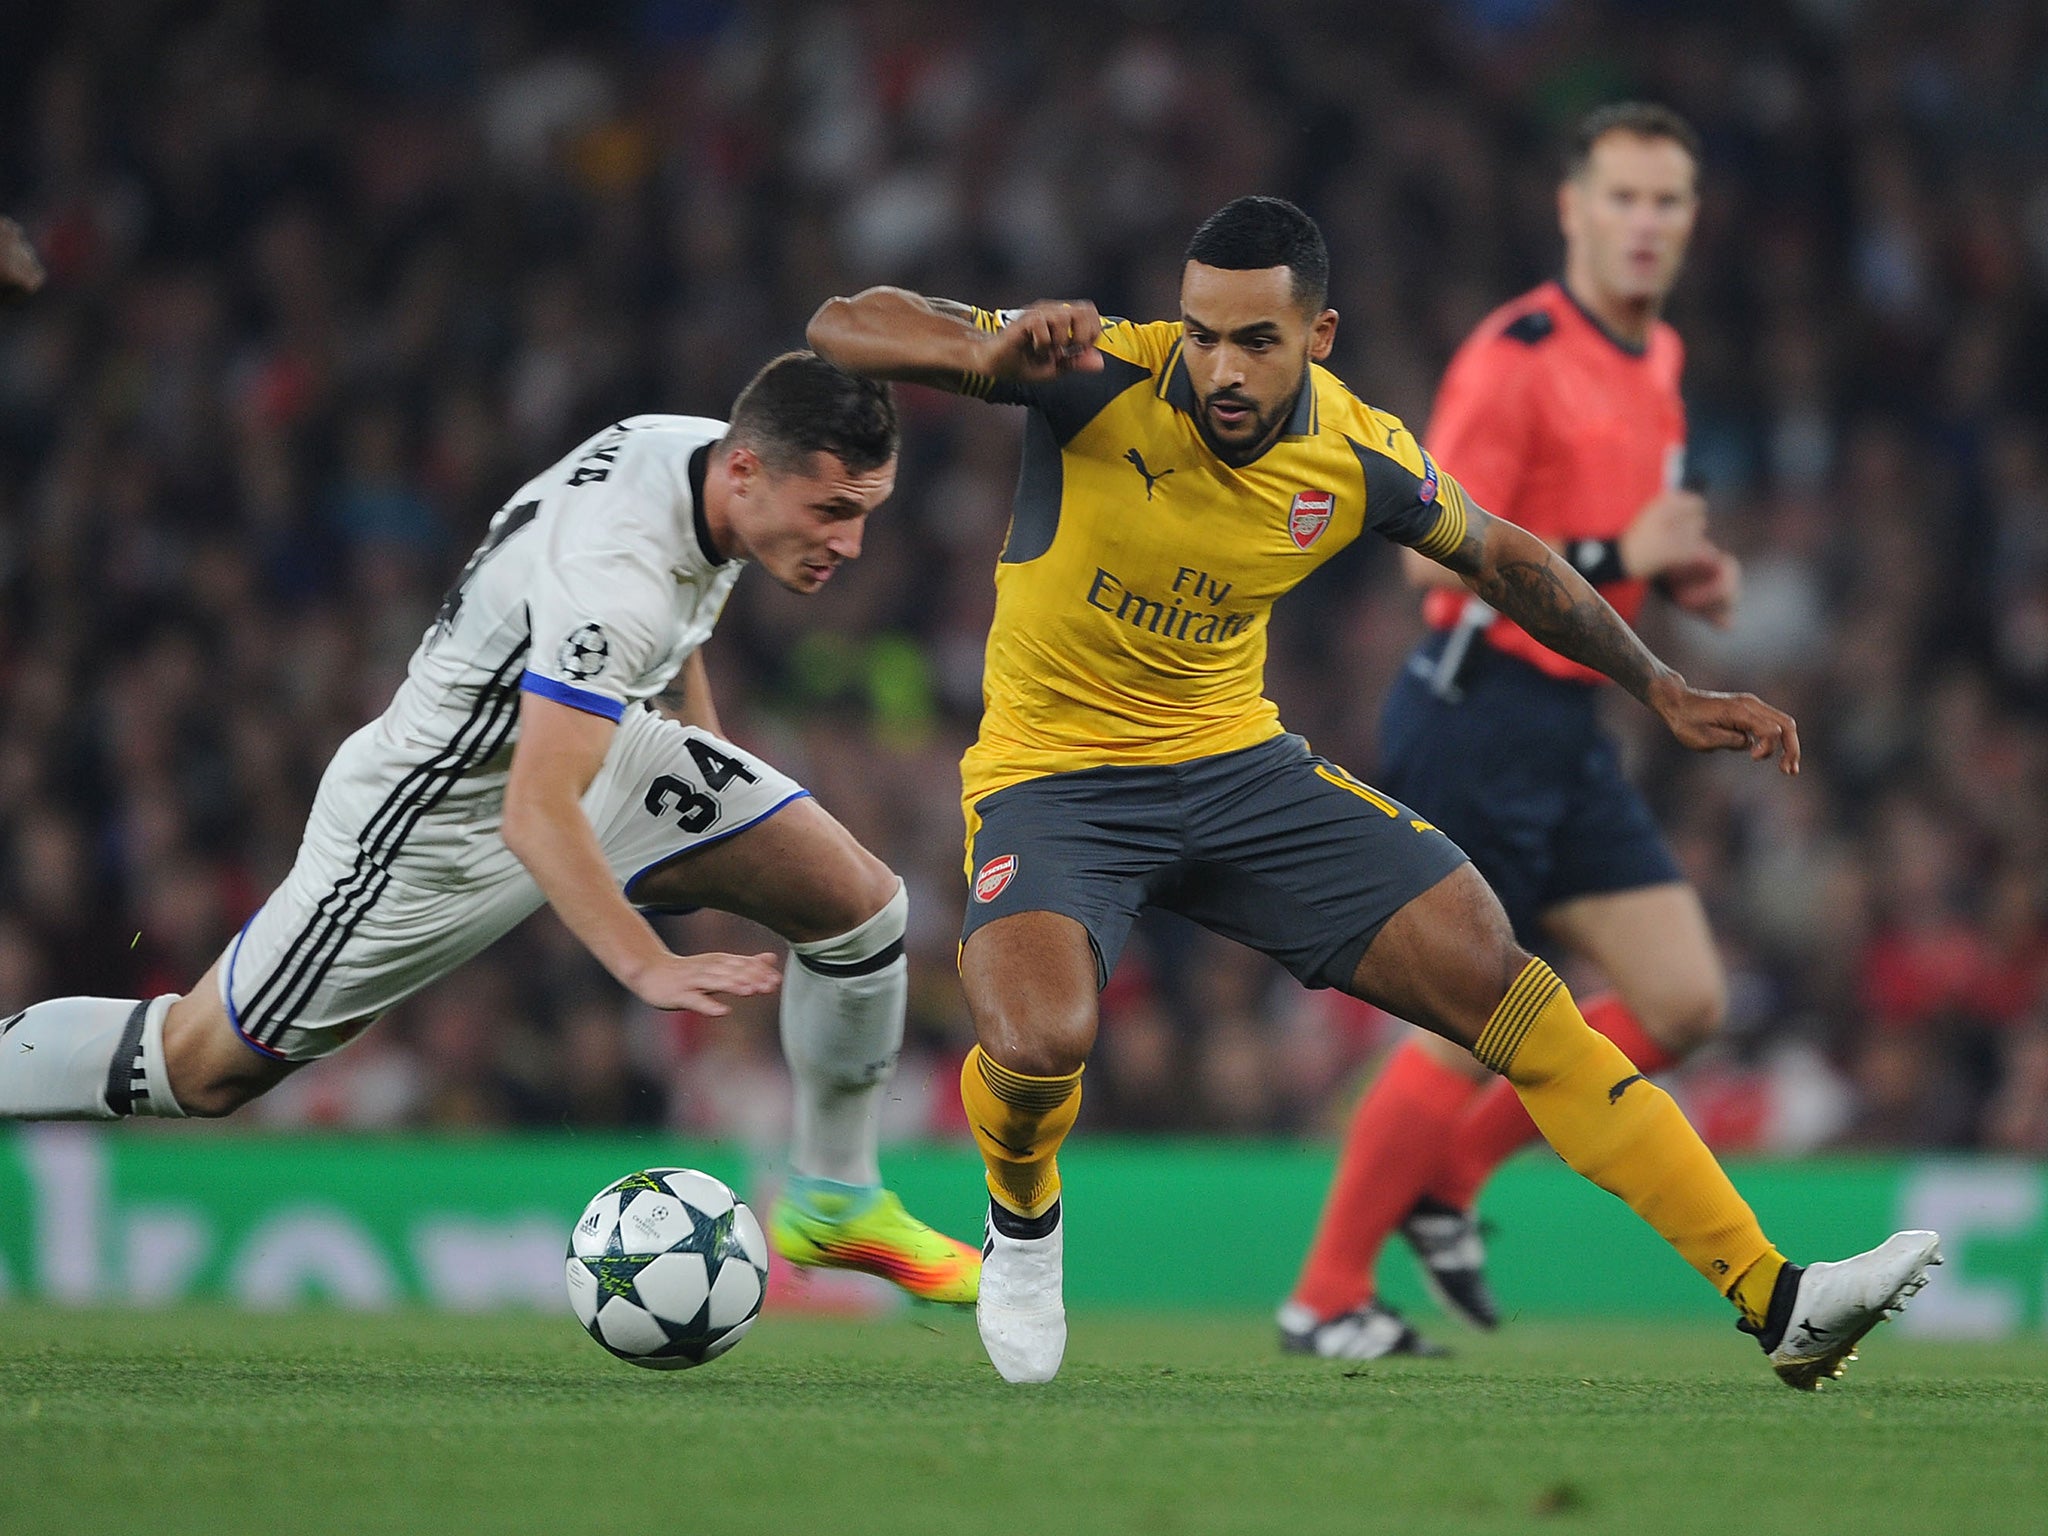 Walcott was a thorn in Basel's side all evening long